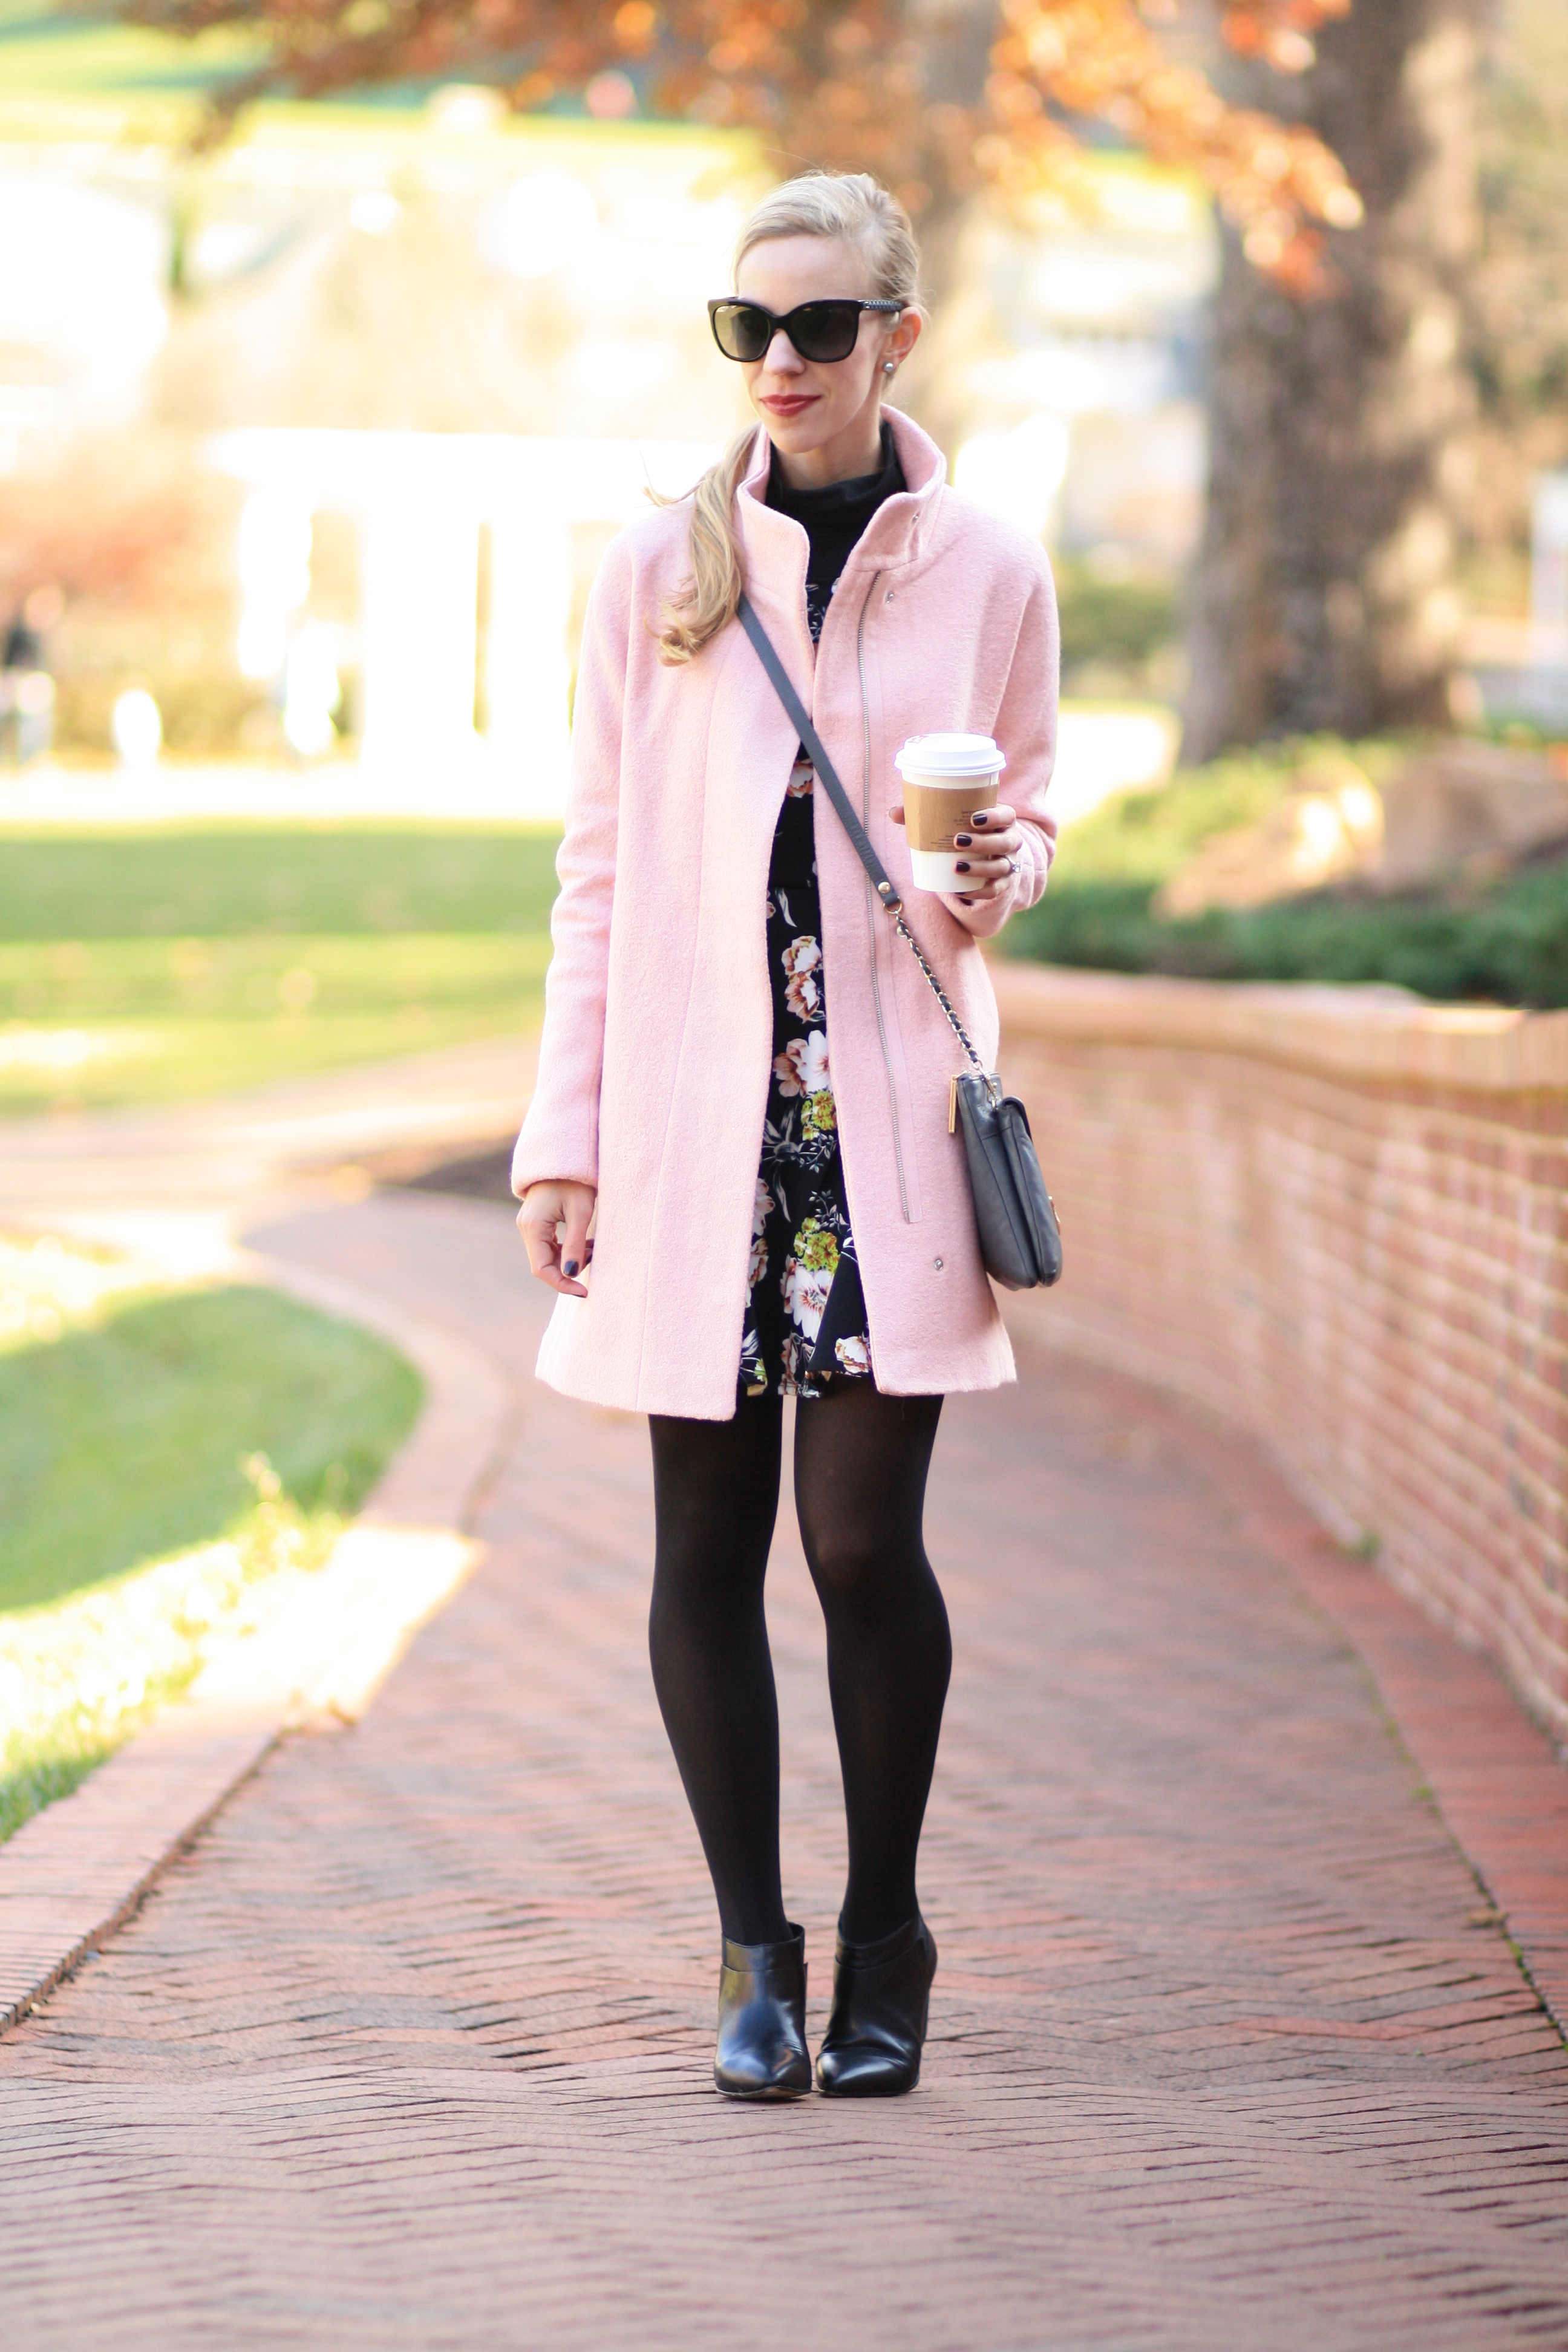 pink dress with black boots